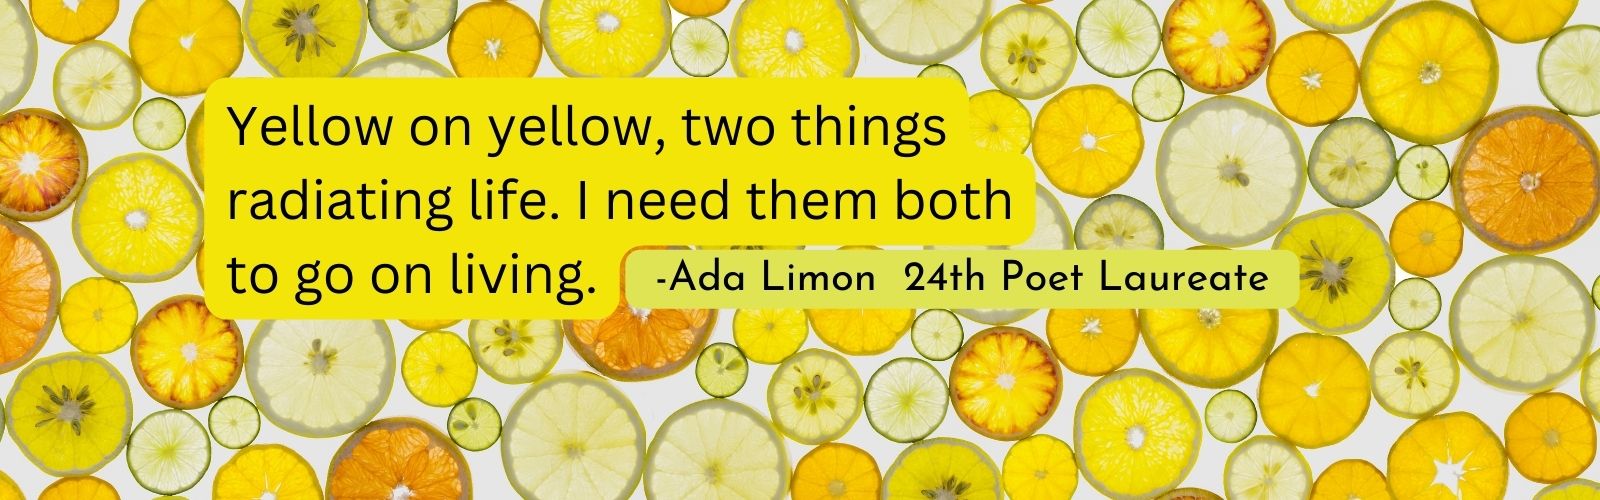 background of lemons with text "Yellow on yellow, two things radiating life. I need them both to go on living." by Ada Limon